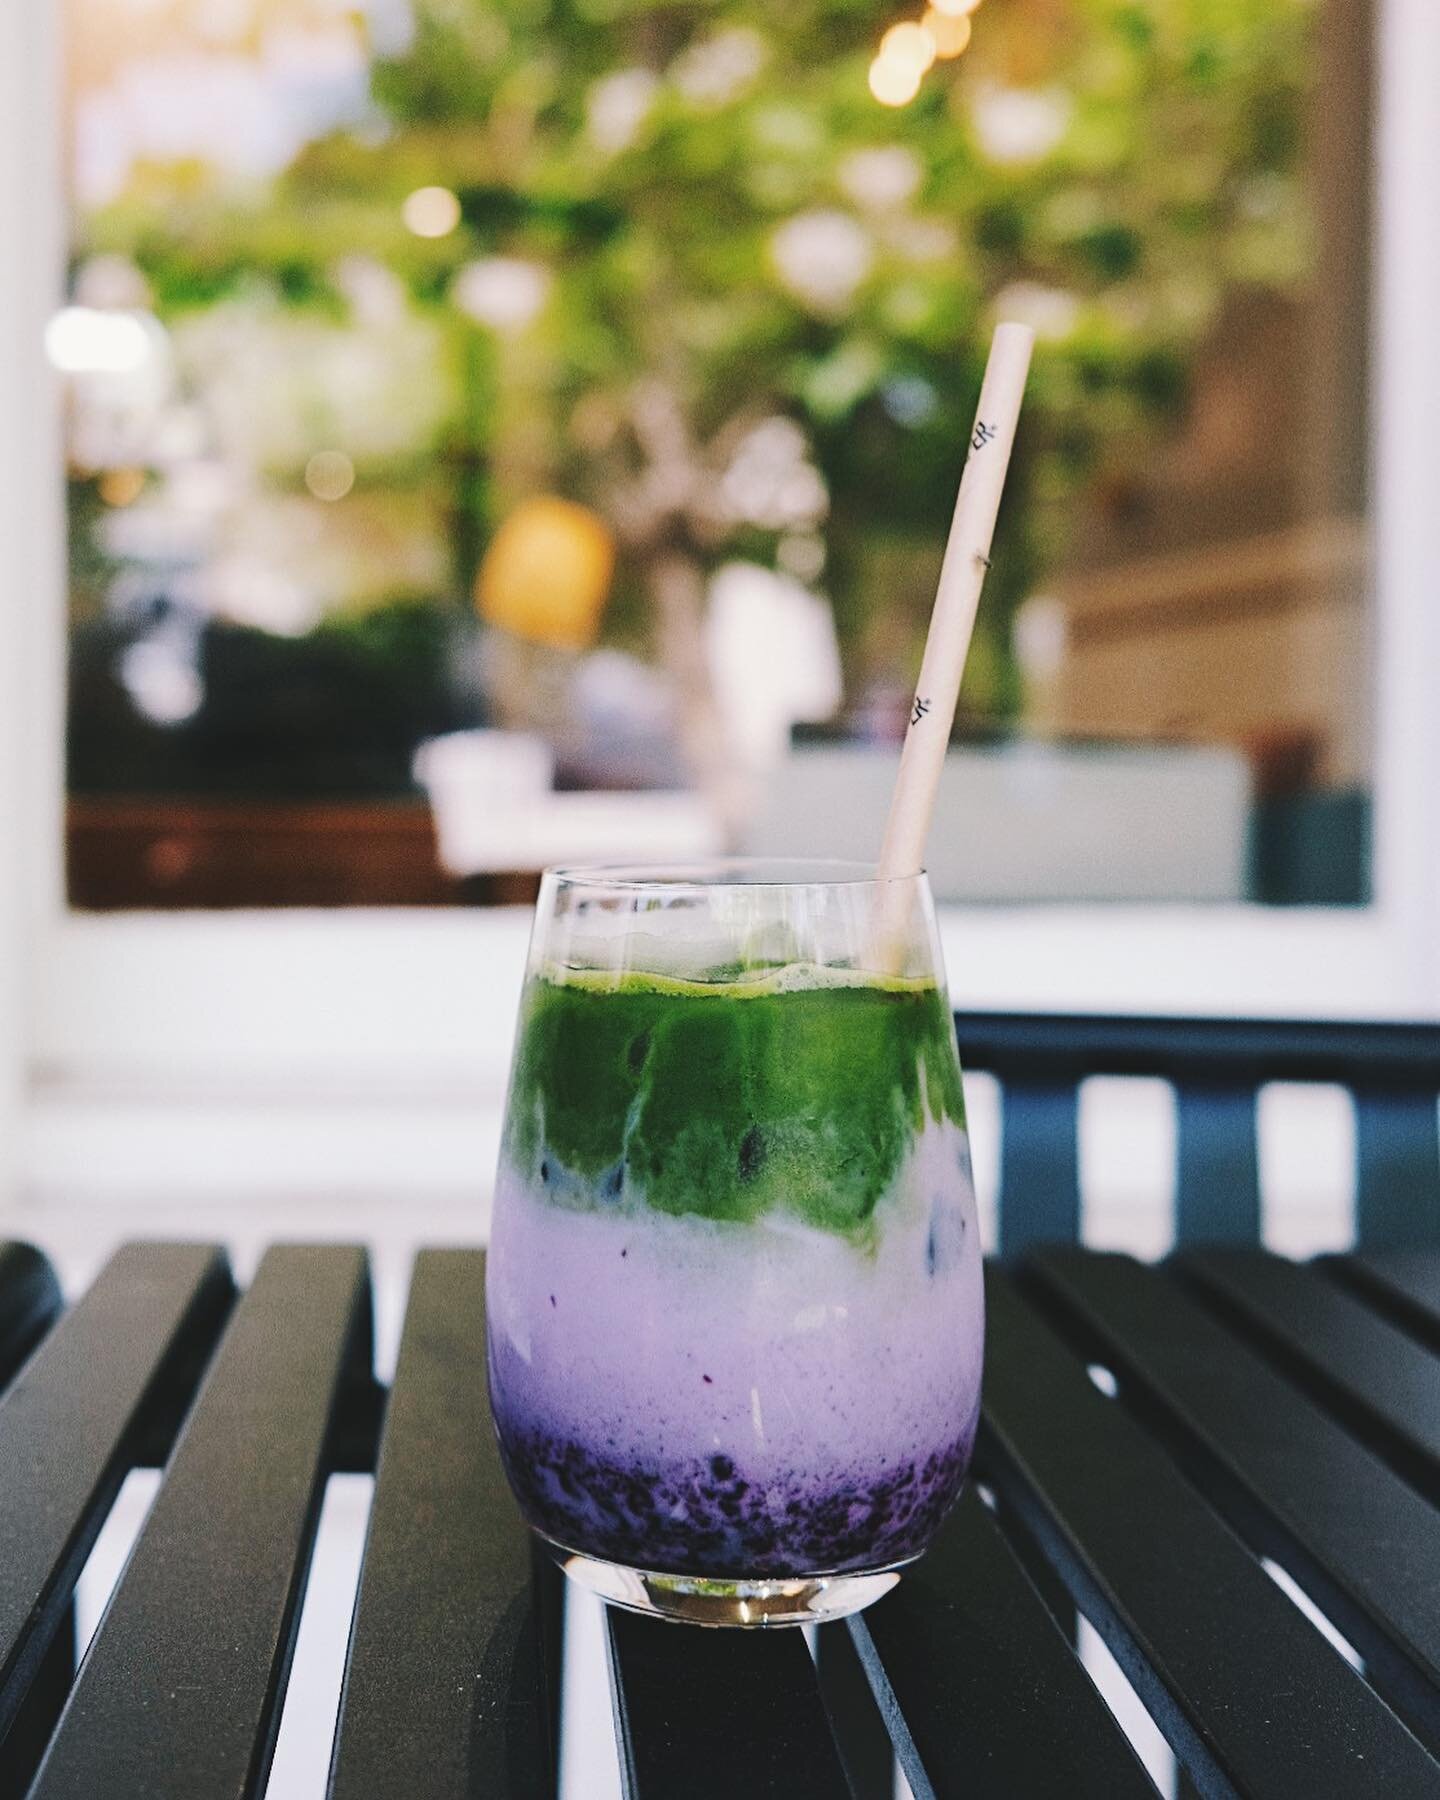 Blueberry Iced Matcha @dinebyarrivalhall is just divine 💜
#matcha #blueberrymatcha #matchalatte #organicmatcha